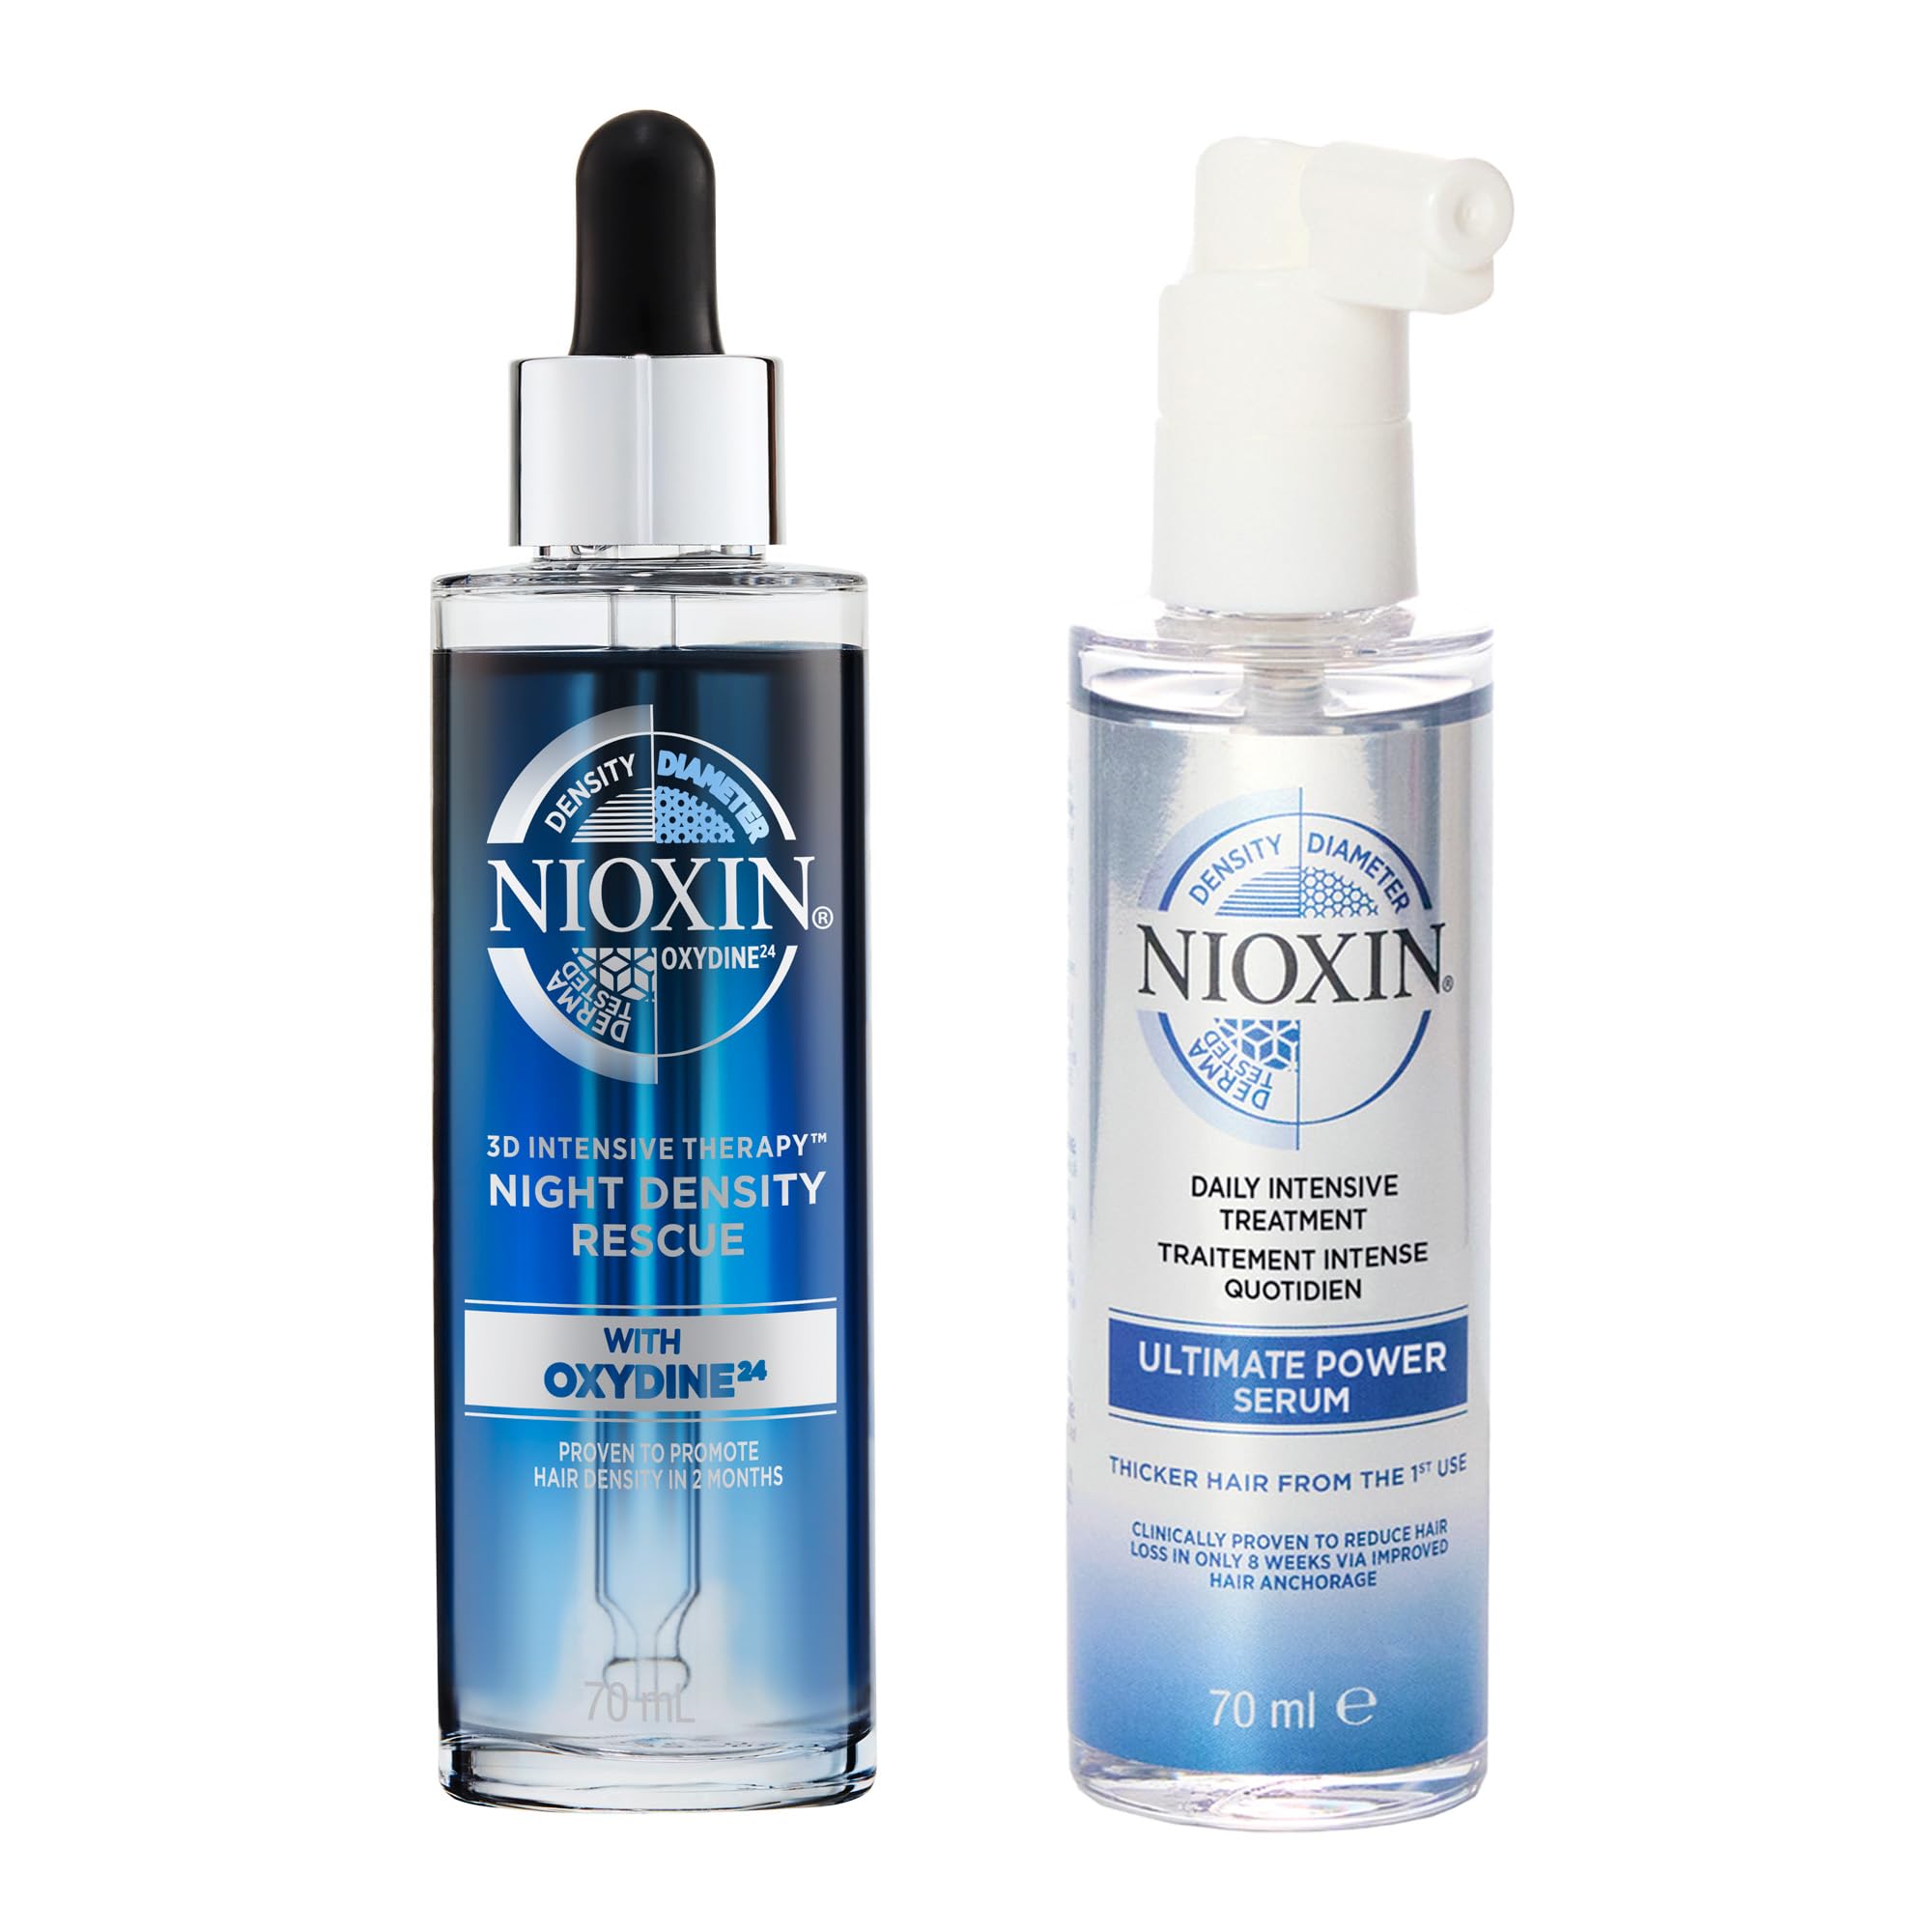 Nioxin Ultimate Power Serum, Anti Hair Loss Leave-In Hair Treatment with Caffeine + Night Density Rescue, Overnight Antioxidant Leave-in Serum, Night and Day Hair and Scalp Treatment Bundle